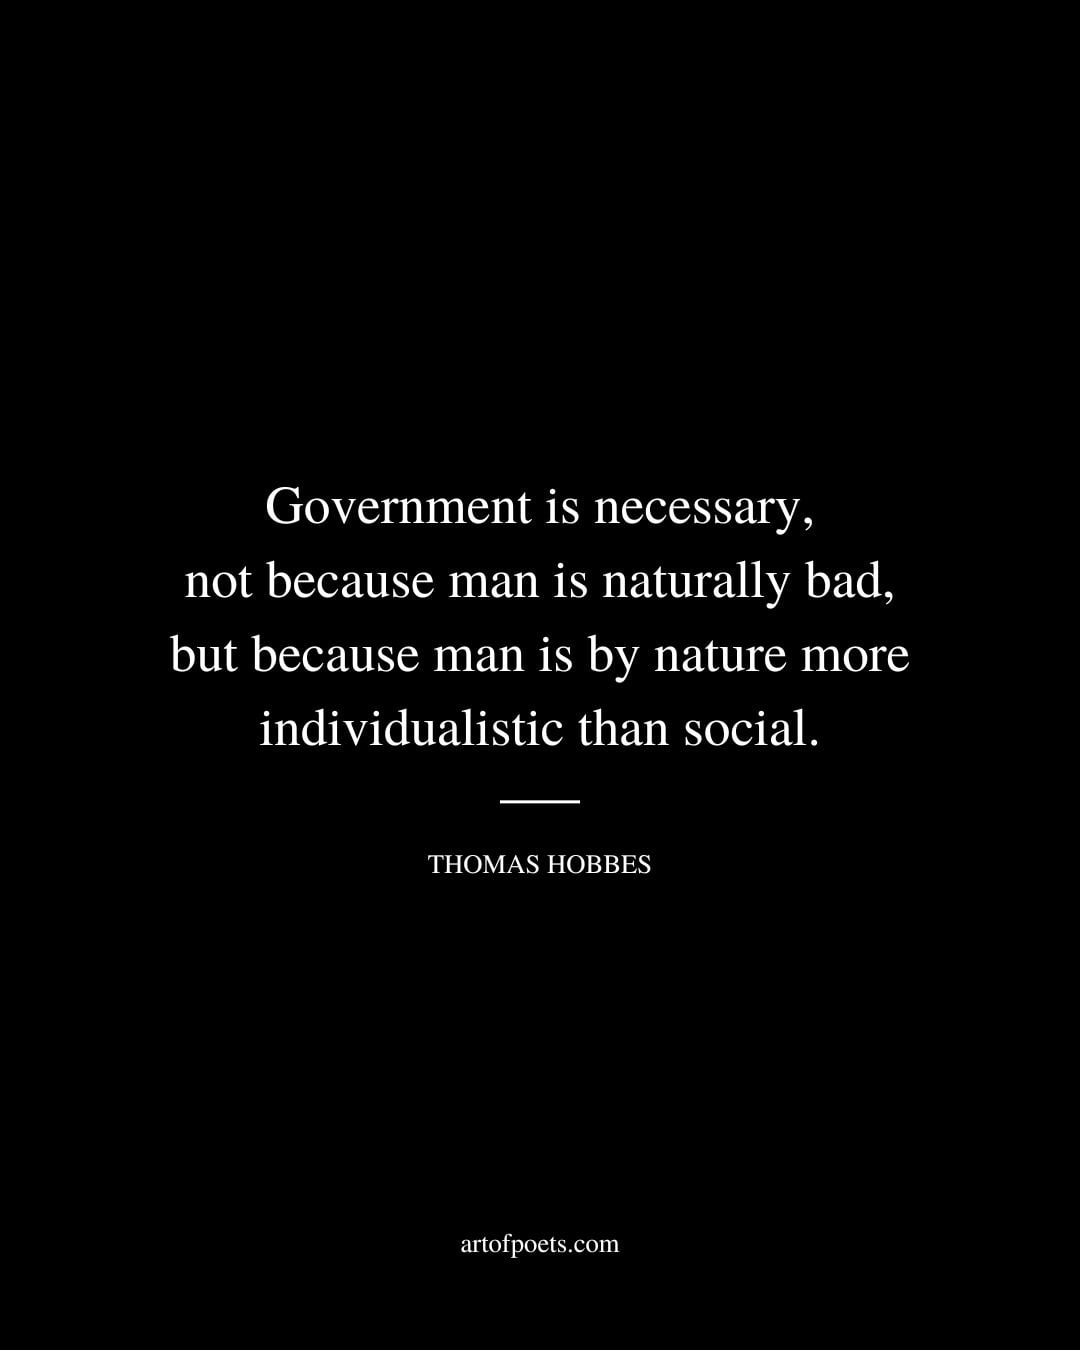 Government is necessary not because man is naturally bad. but because man is by nature more individualistic than social